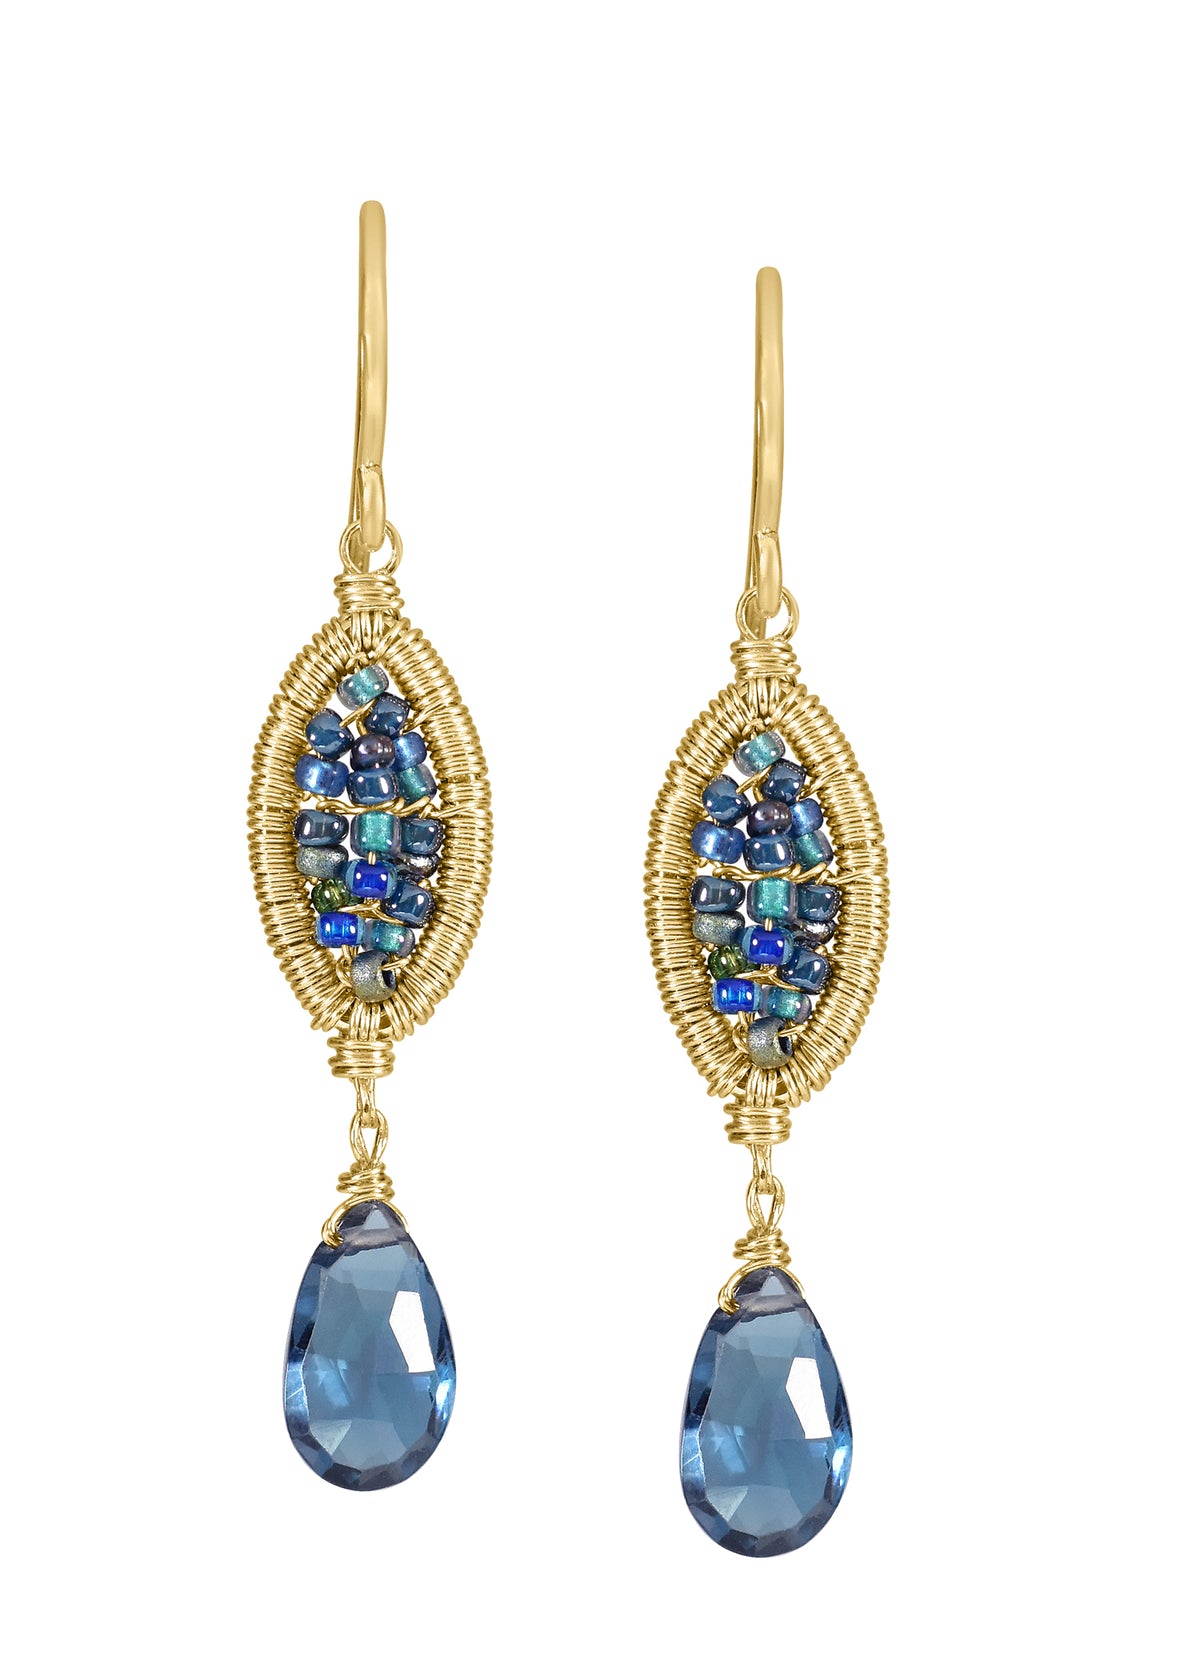 London blue topaz Seed beads 14k gold fill Earrings measure 1-1/2&quot; in length (including the ear wires) and 1/4&quot; in width at the widest point Handmade in our Los Angeles studio